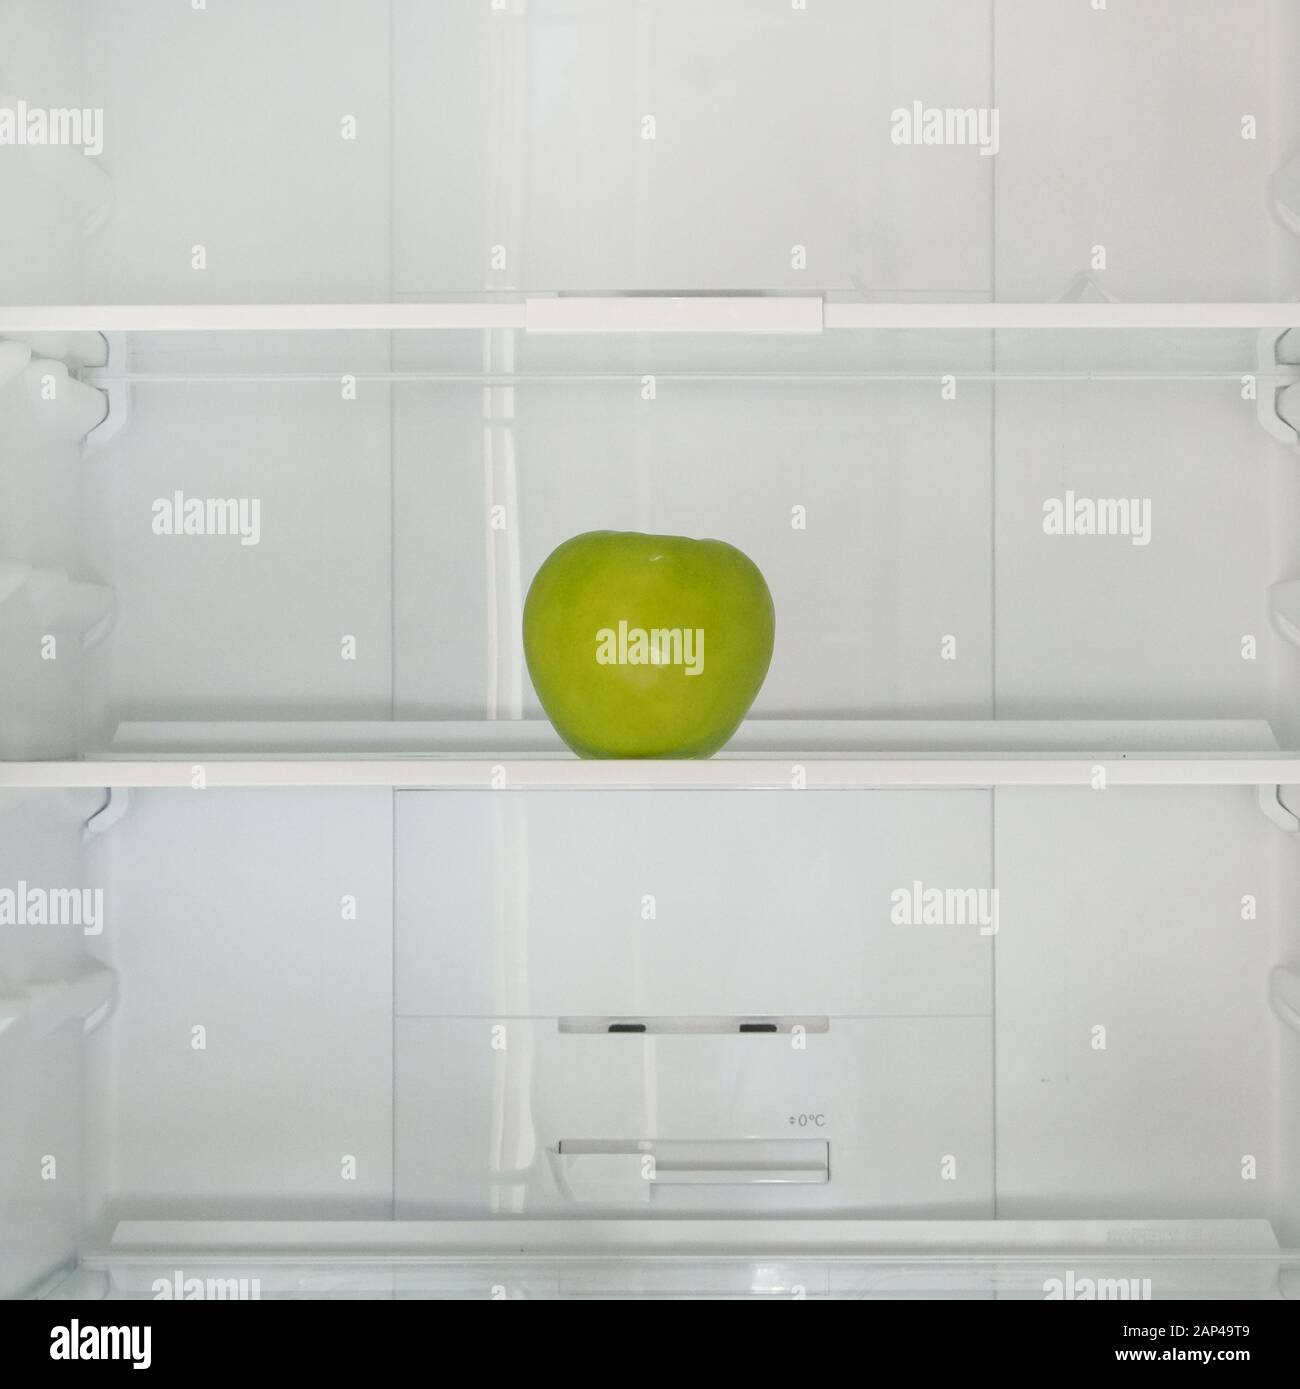 Green ripe apple on the shelf in the fridge. Health starvation, lose weight. Raw diet, starving concept. Stock Photo